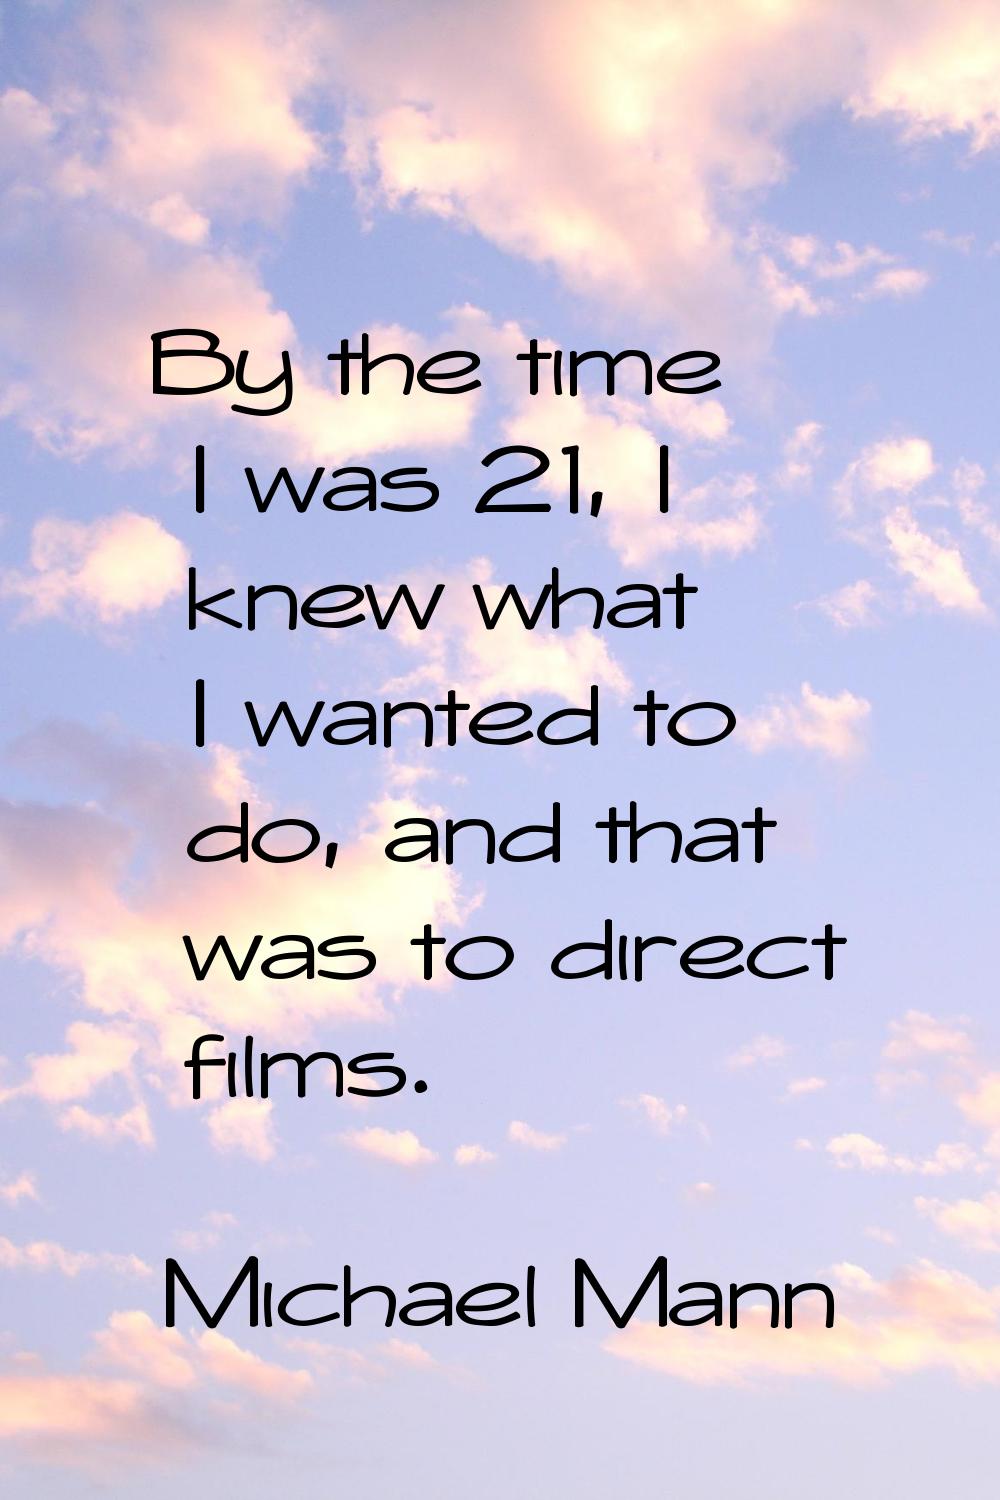 By the time I was 21, I knew what I wanted to do, and that was to direct films.